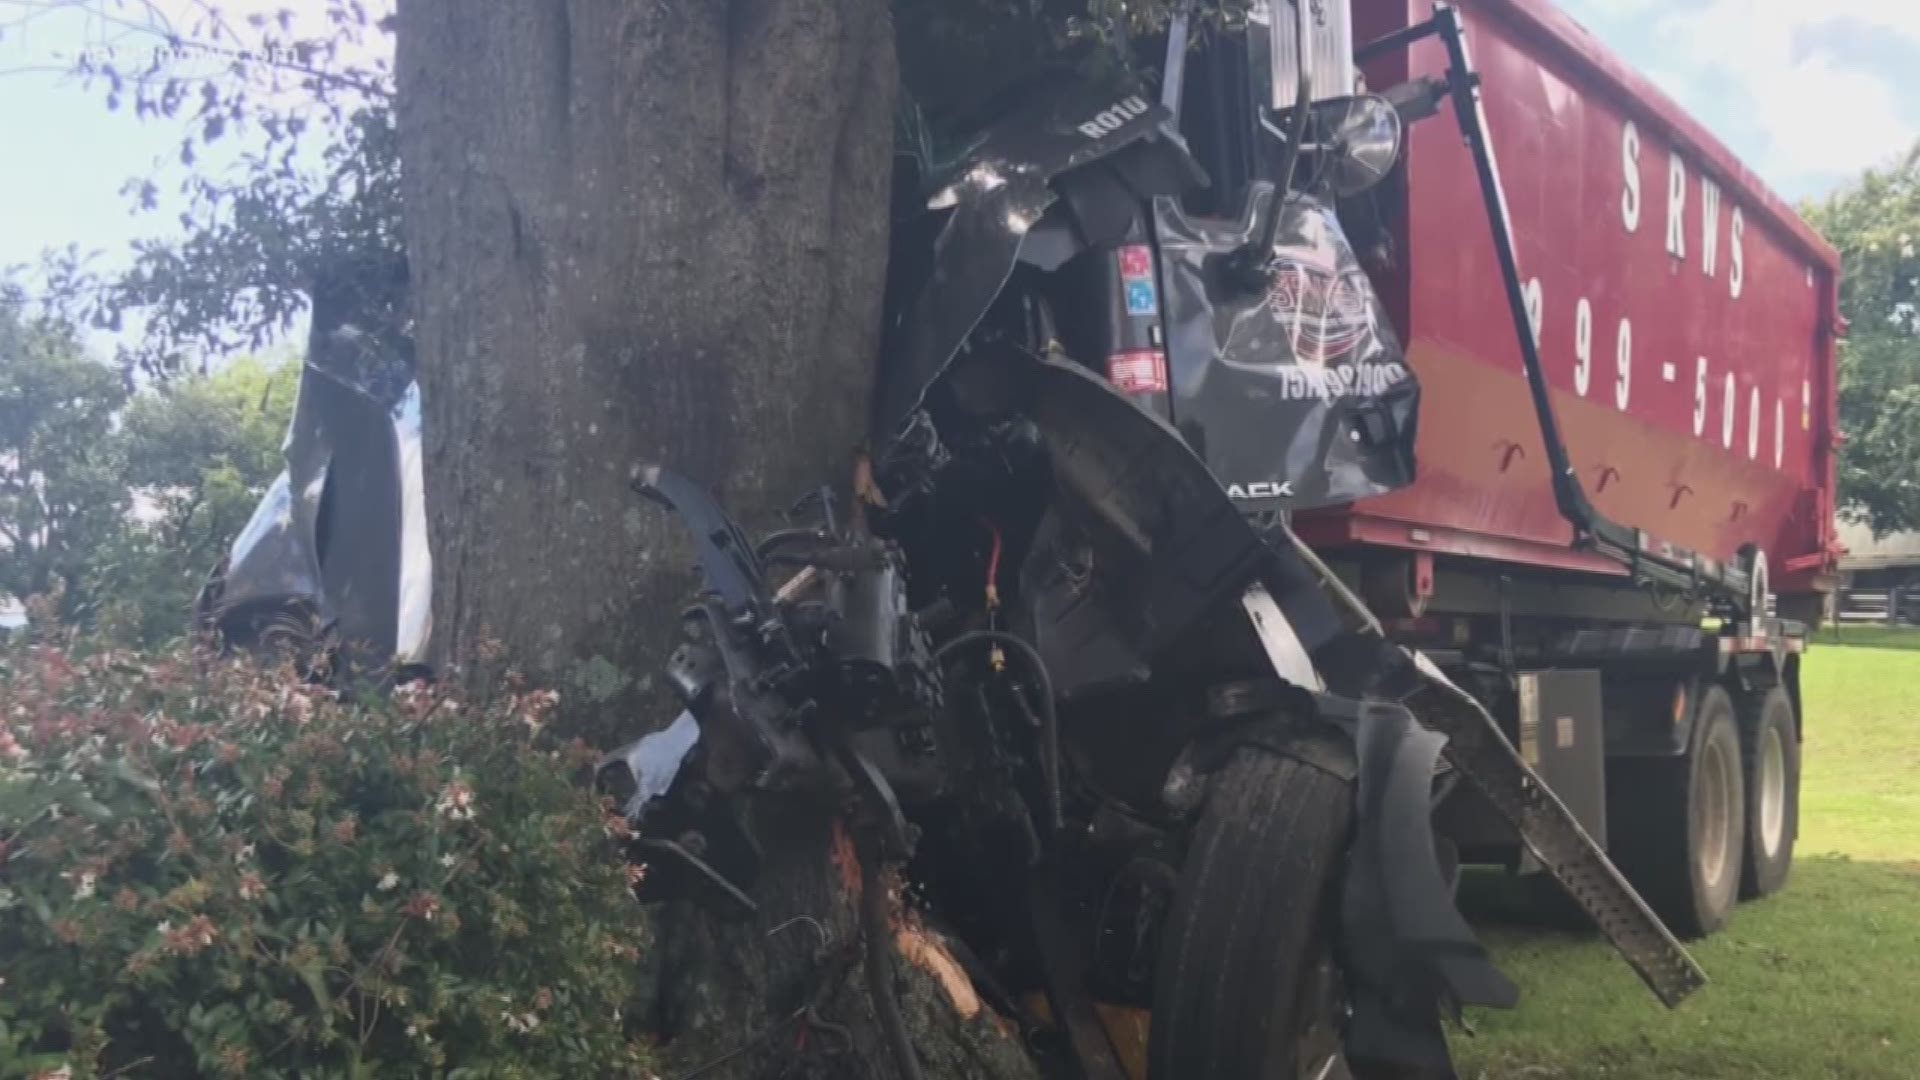 A dump truck driver went off the highway and slammed into a tree. Virginia State Police said the driver suffered a medical issue before going off the road.